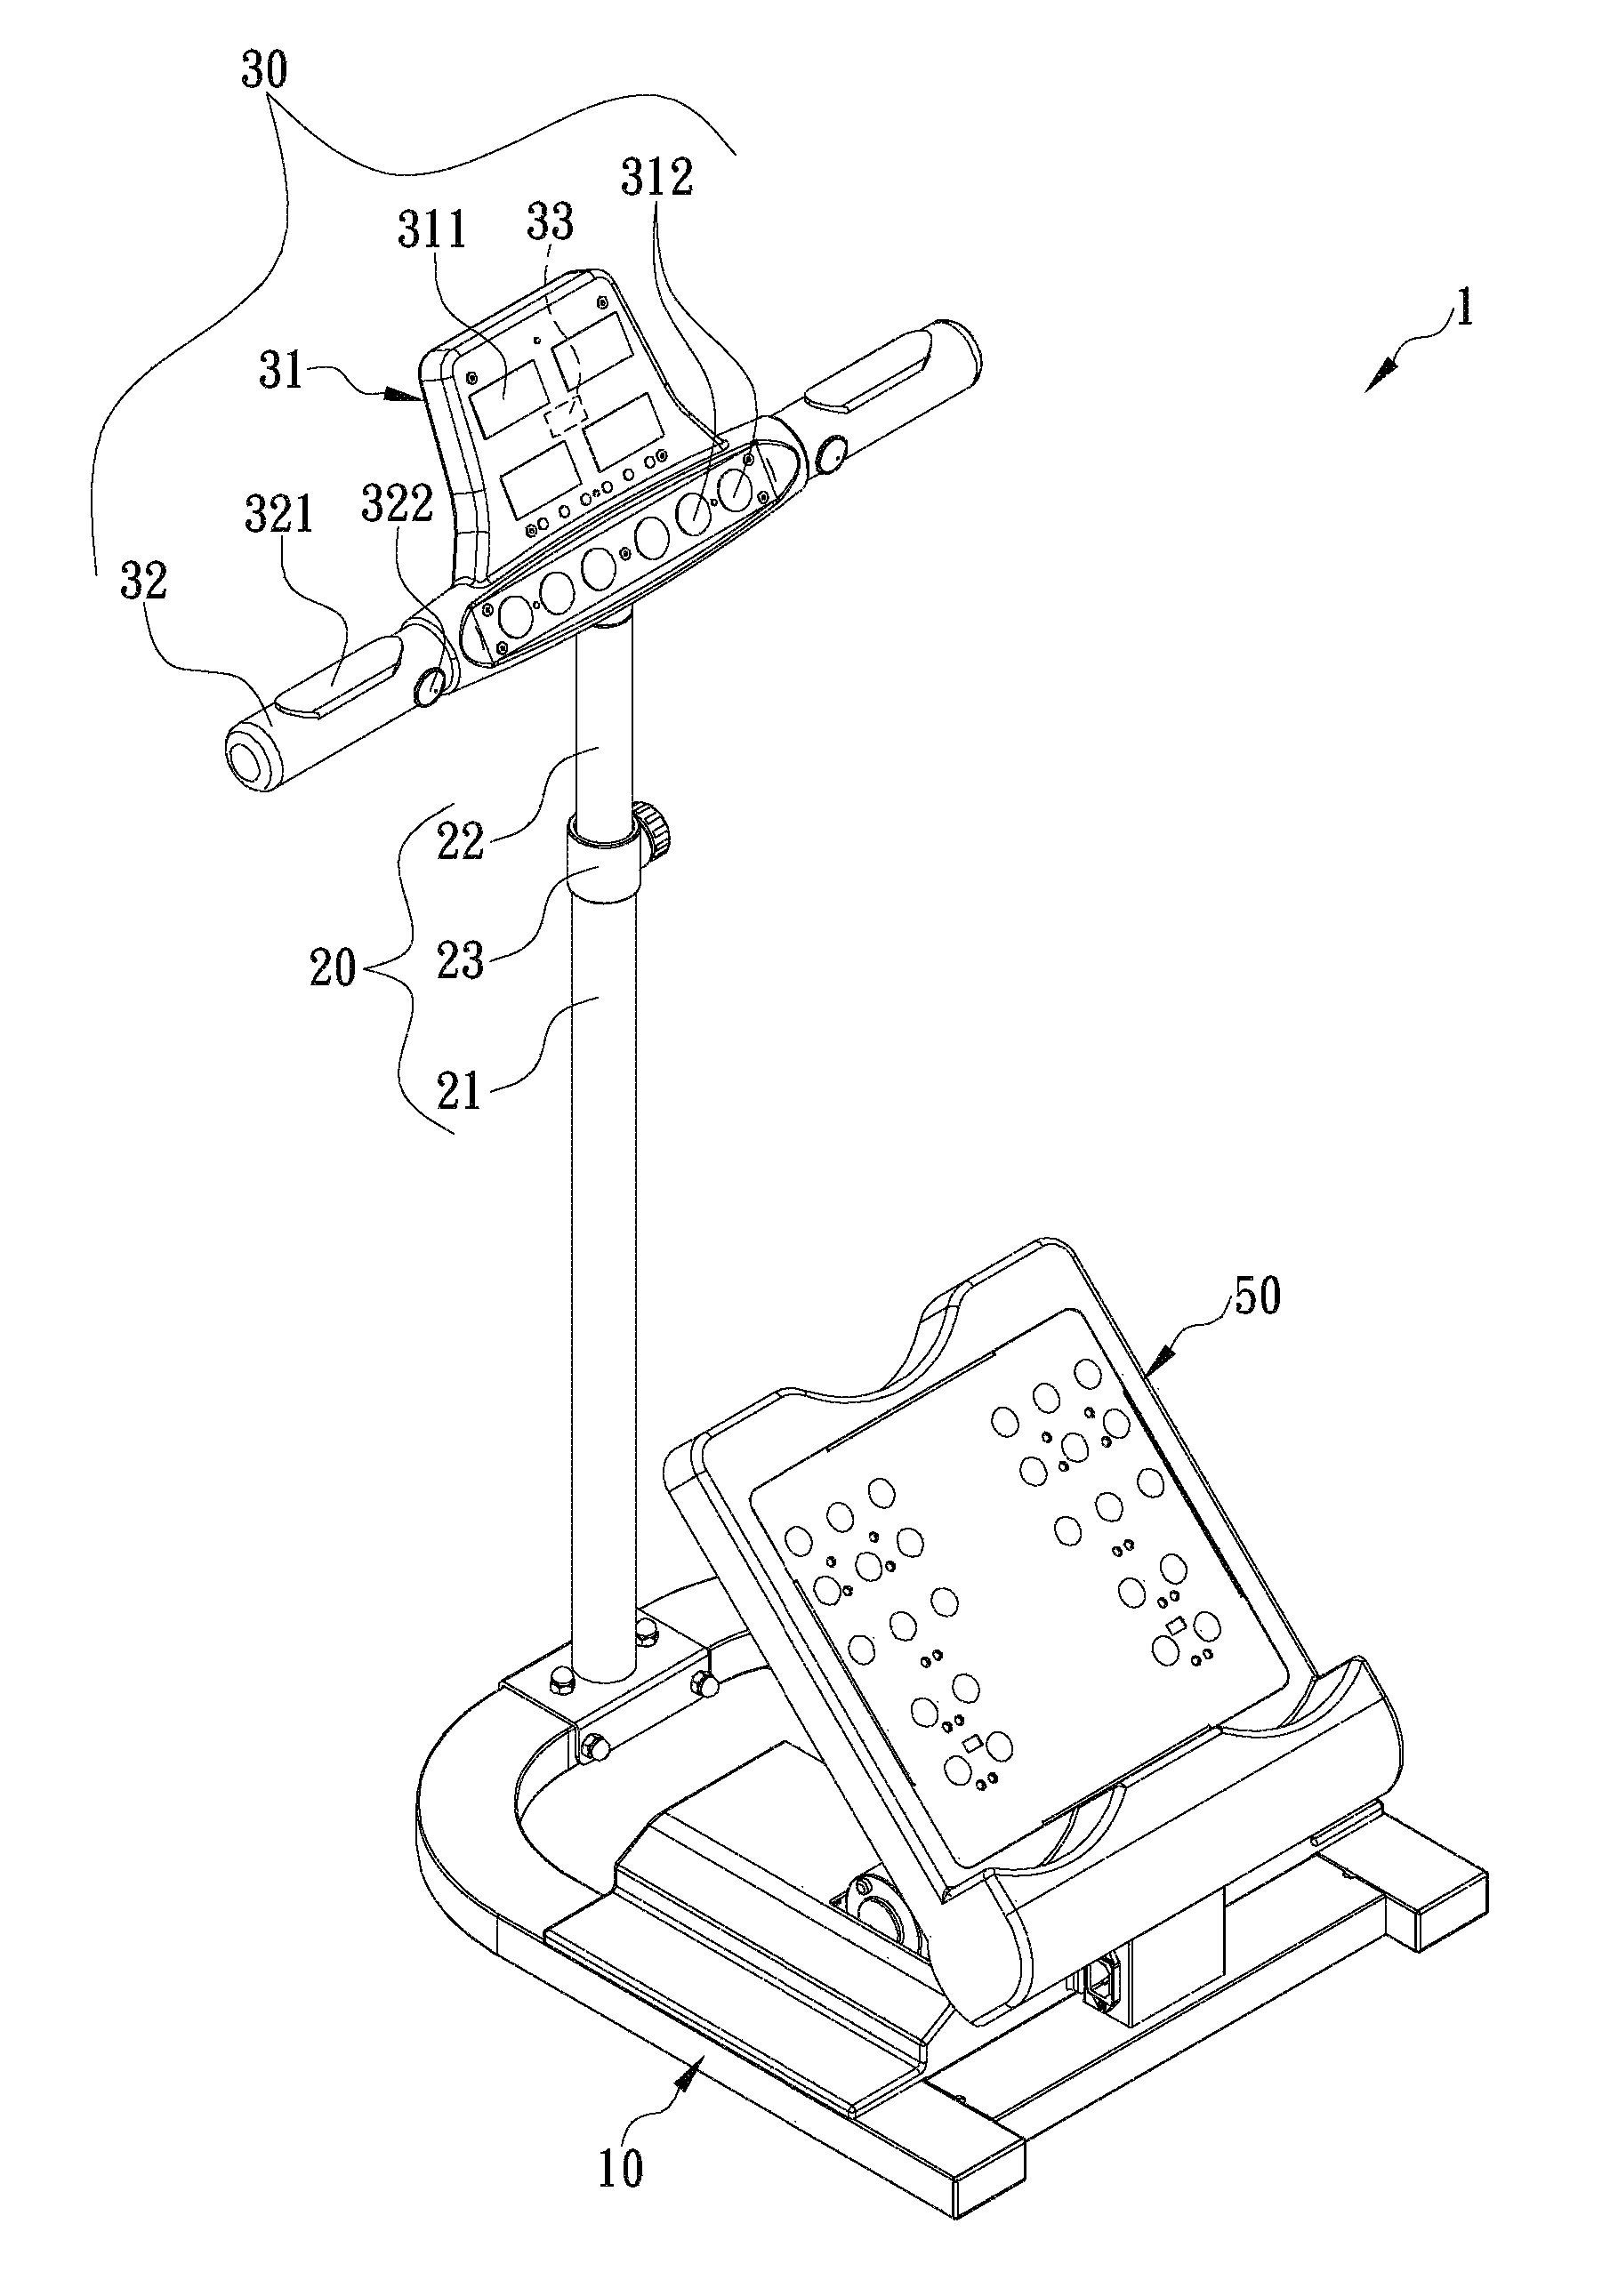 Feet stretching device capable of dynamically adjusting stretching angle upon user demand